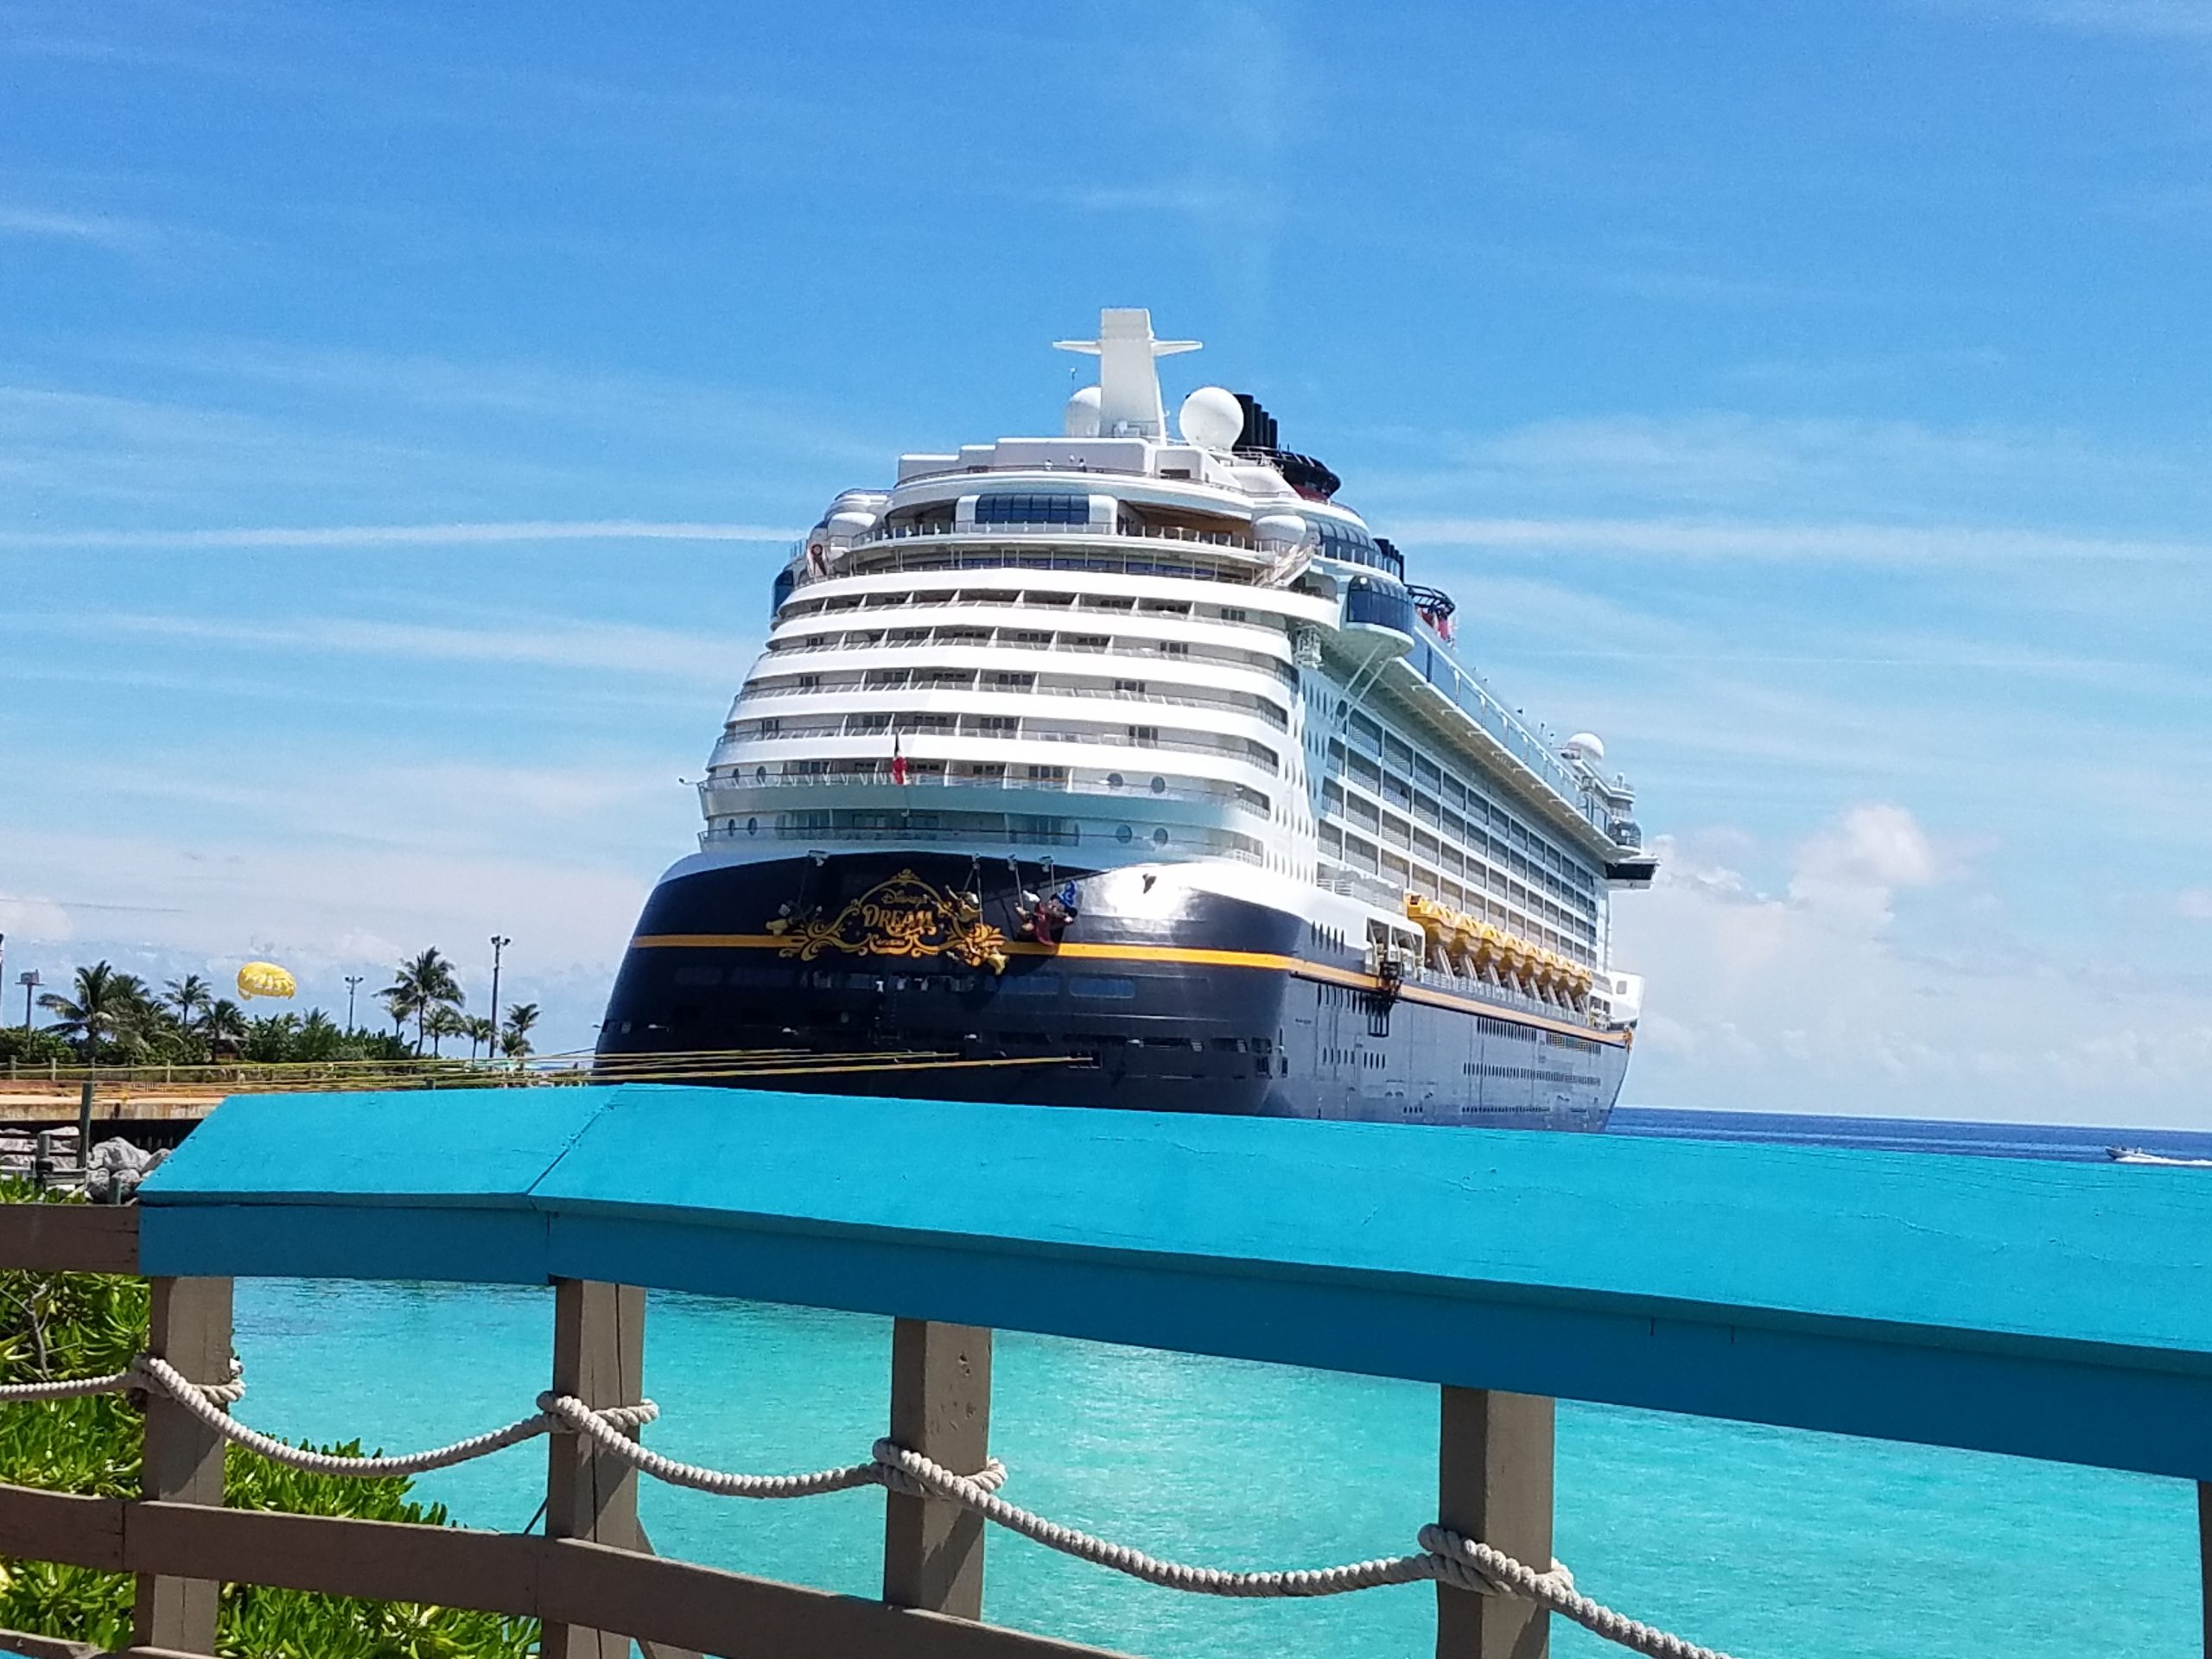 The Disney Dream in port at Castaway Cay.